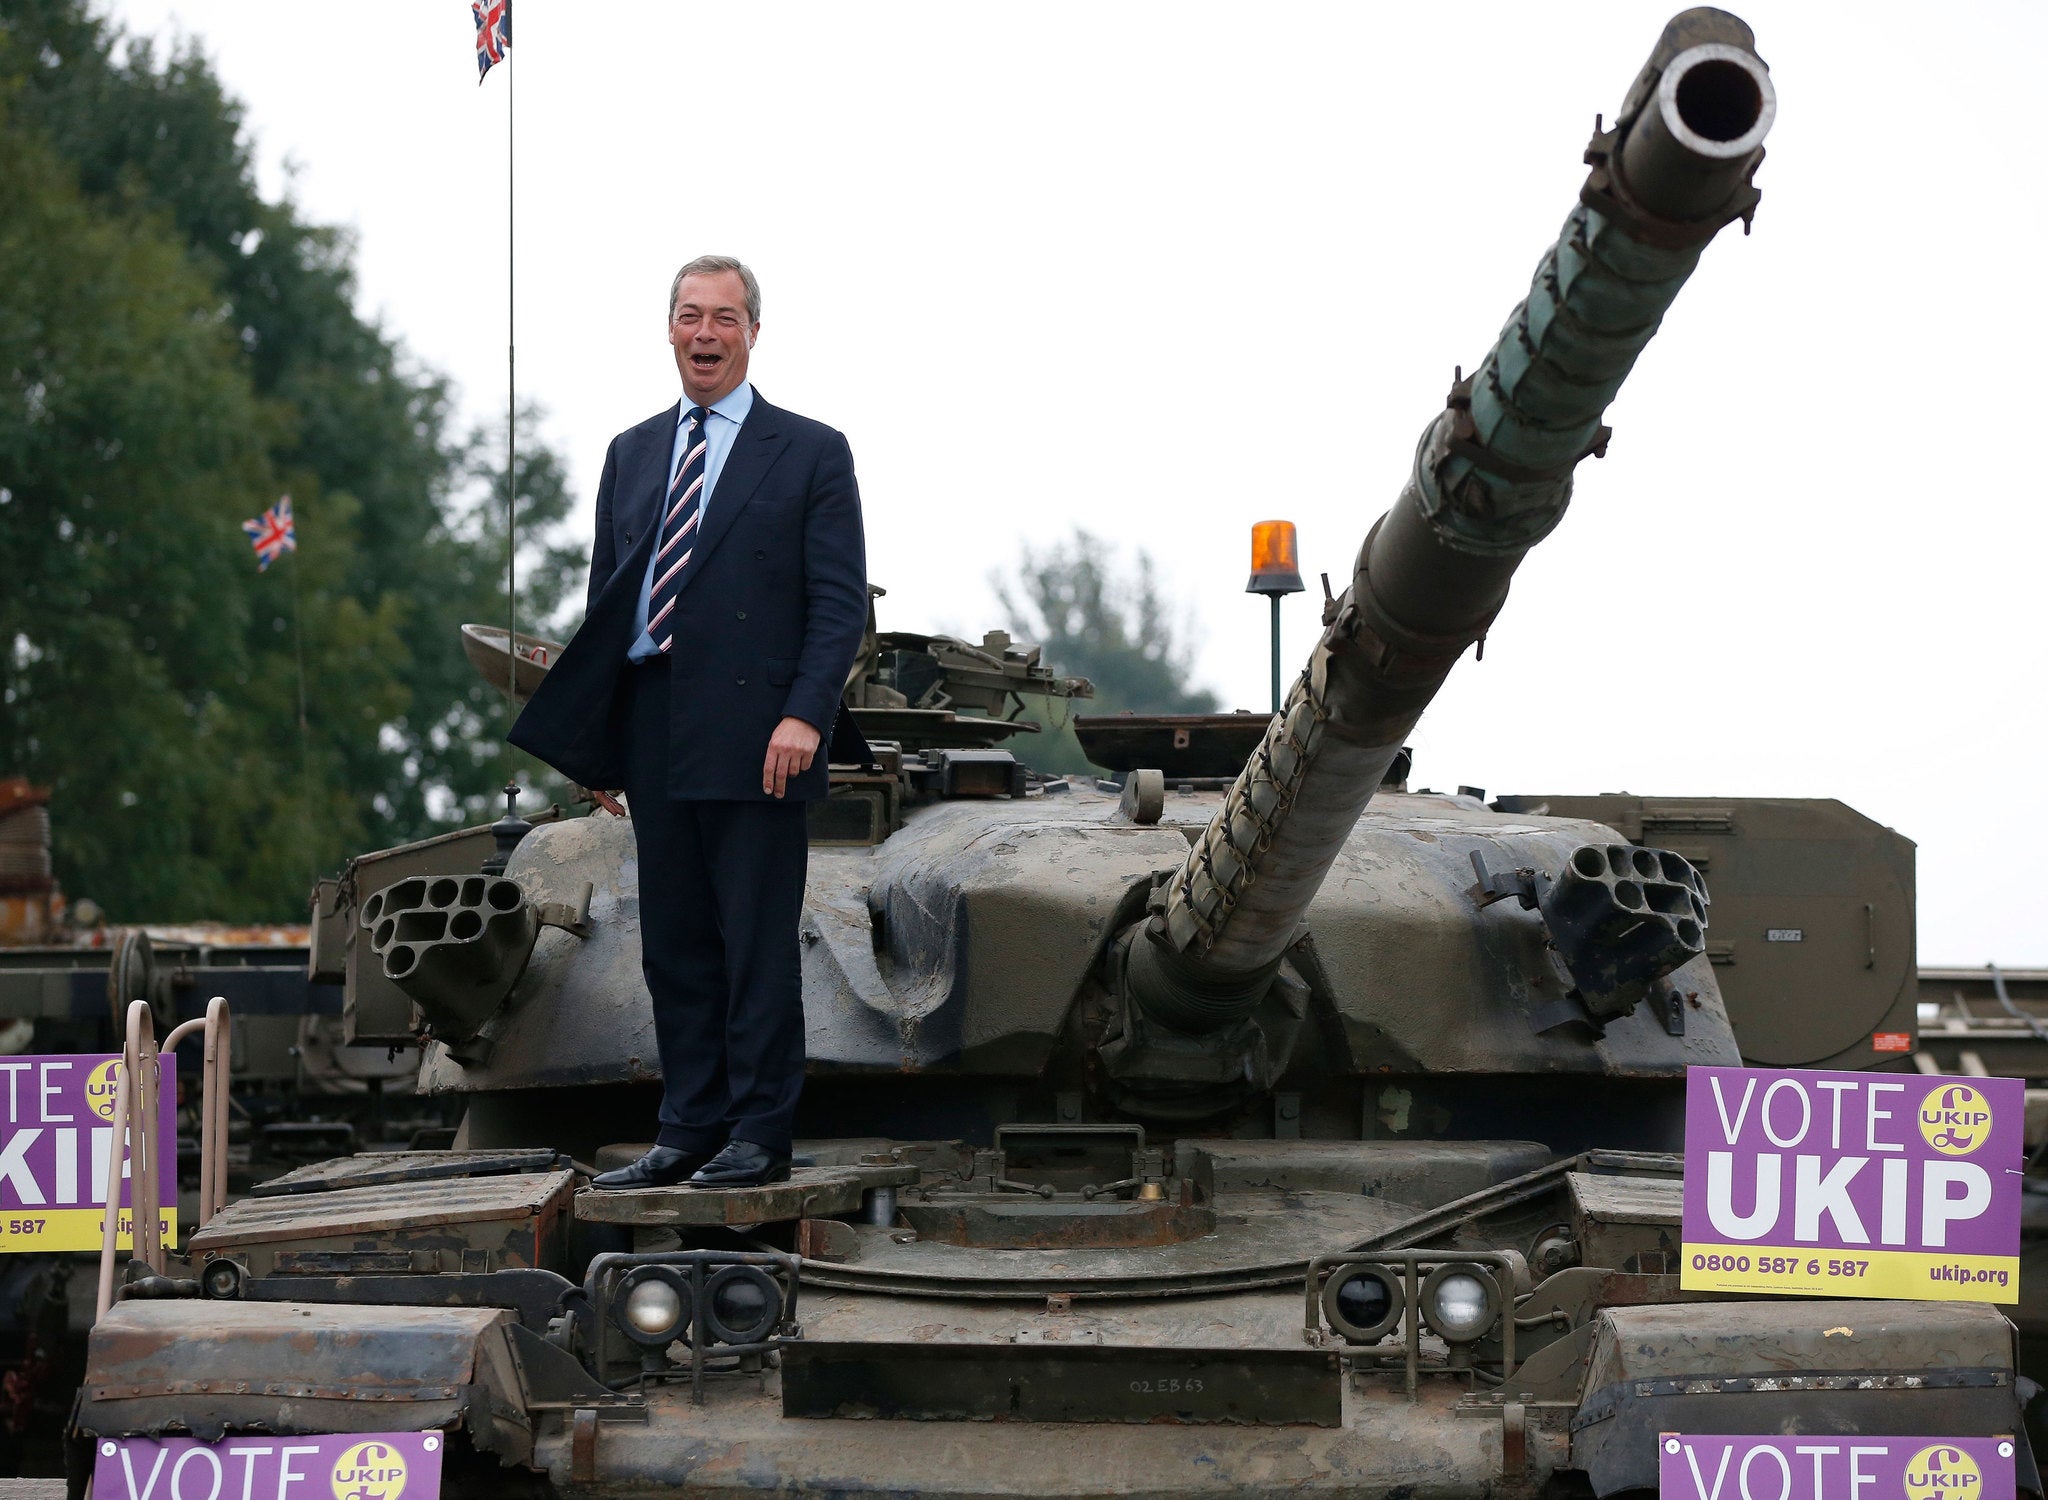 Nigel Farage reportedly considered hiring a tank for Ukip on polling day